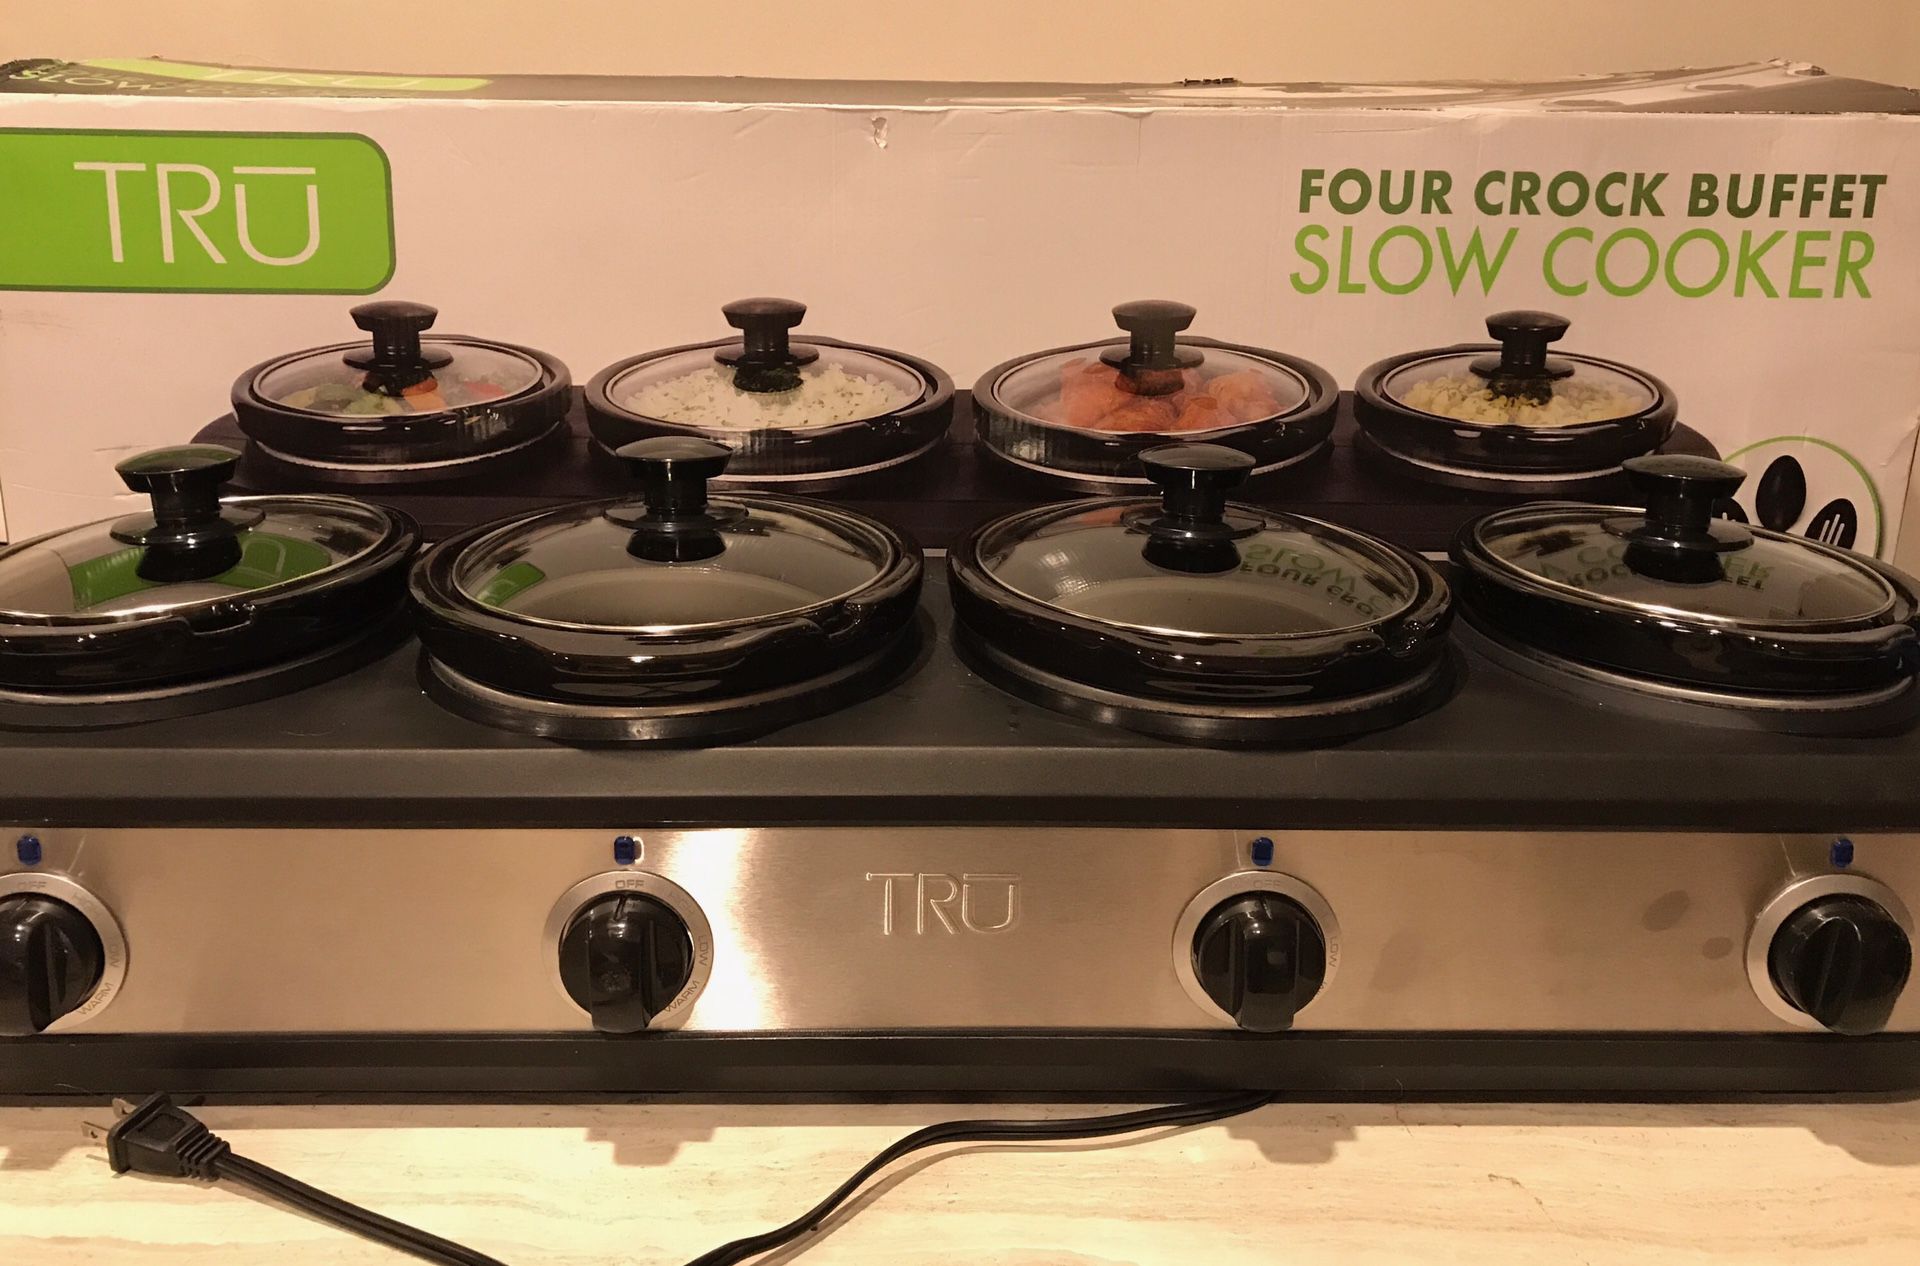 Crockpot Classic Slow Cooker 4.5 Qt 3 Heat Settings Brand New for Sale in  Oakland Park, FL - OfferUp